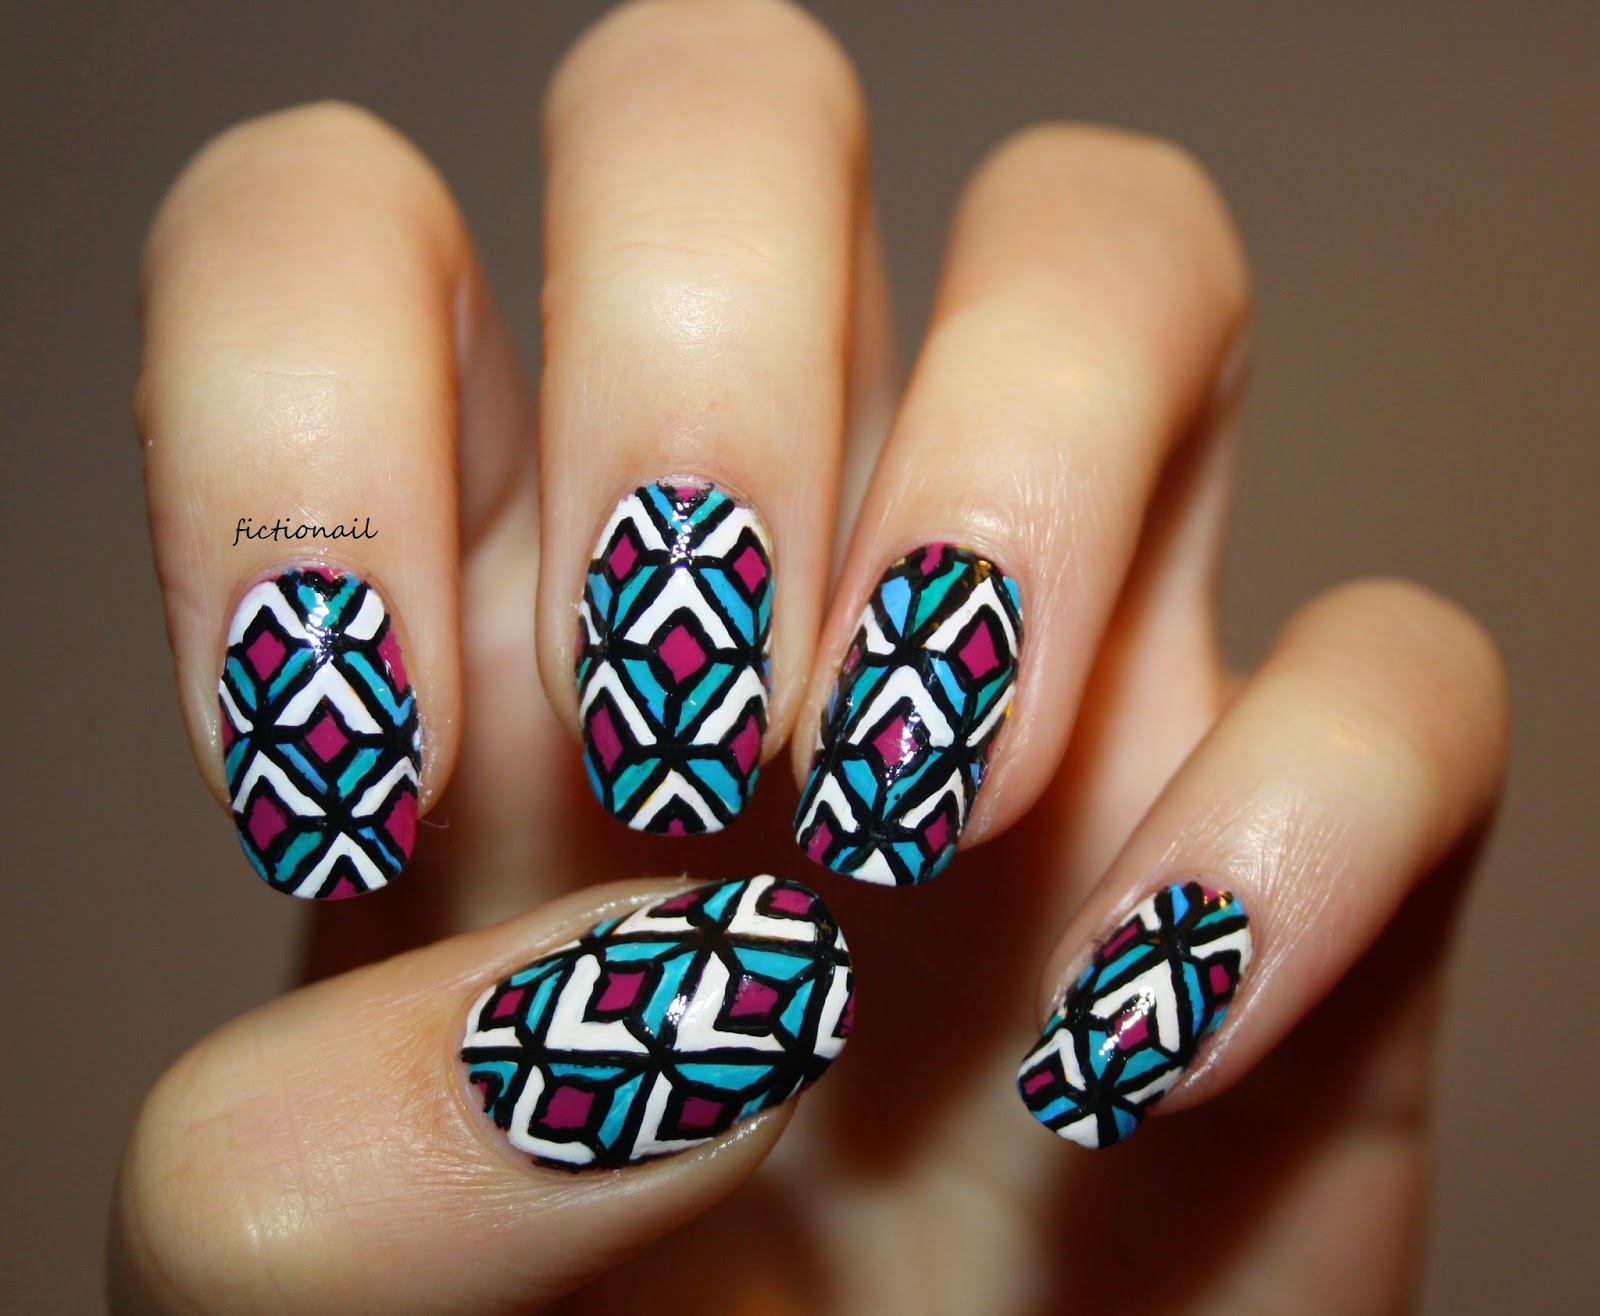 8. Matte Black Gel Nails with Geometric Patterns - wide 5